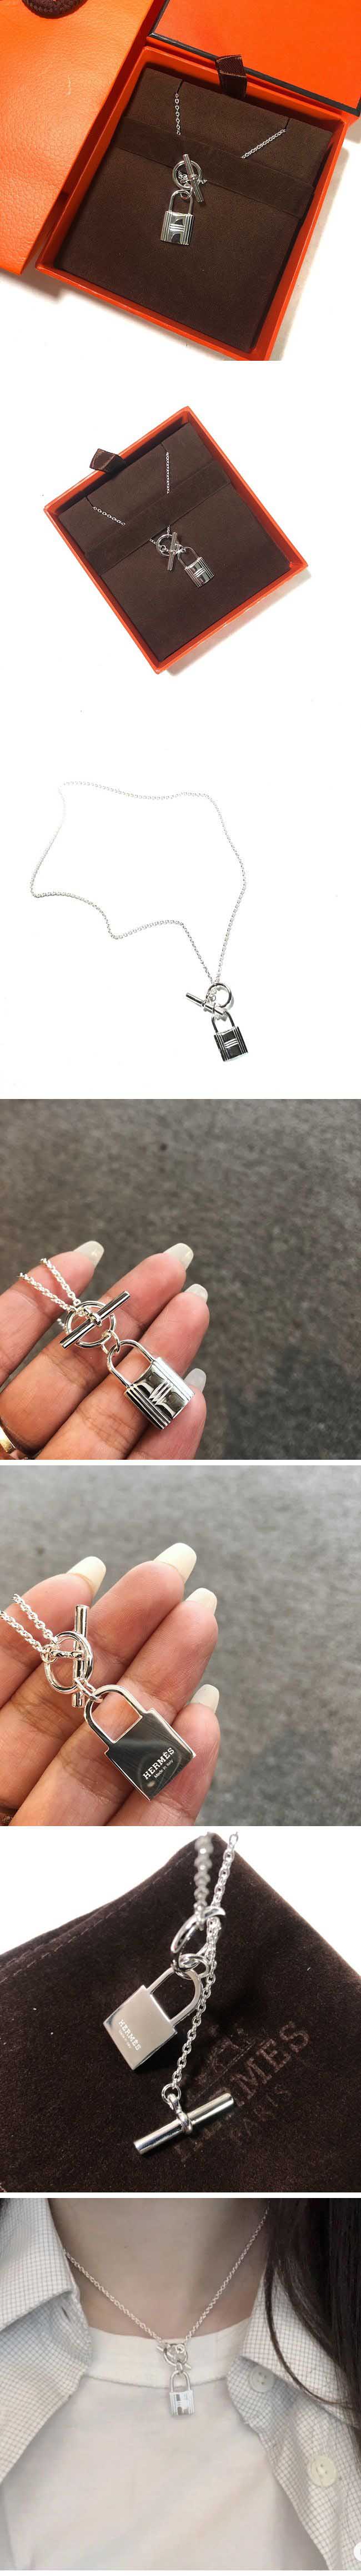 Hermes Padlock Design Necklace エルメス パドロック デザイン ネックレス